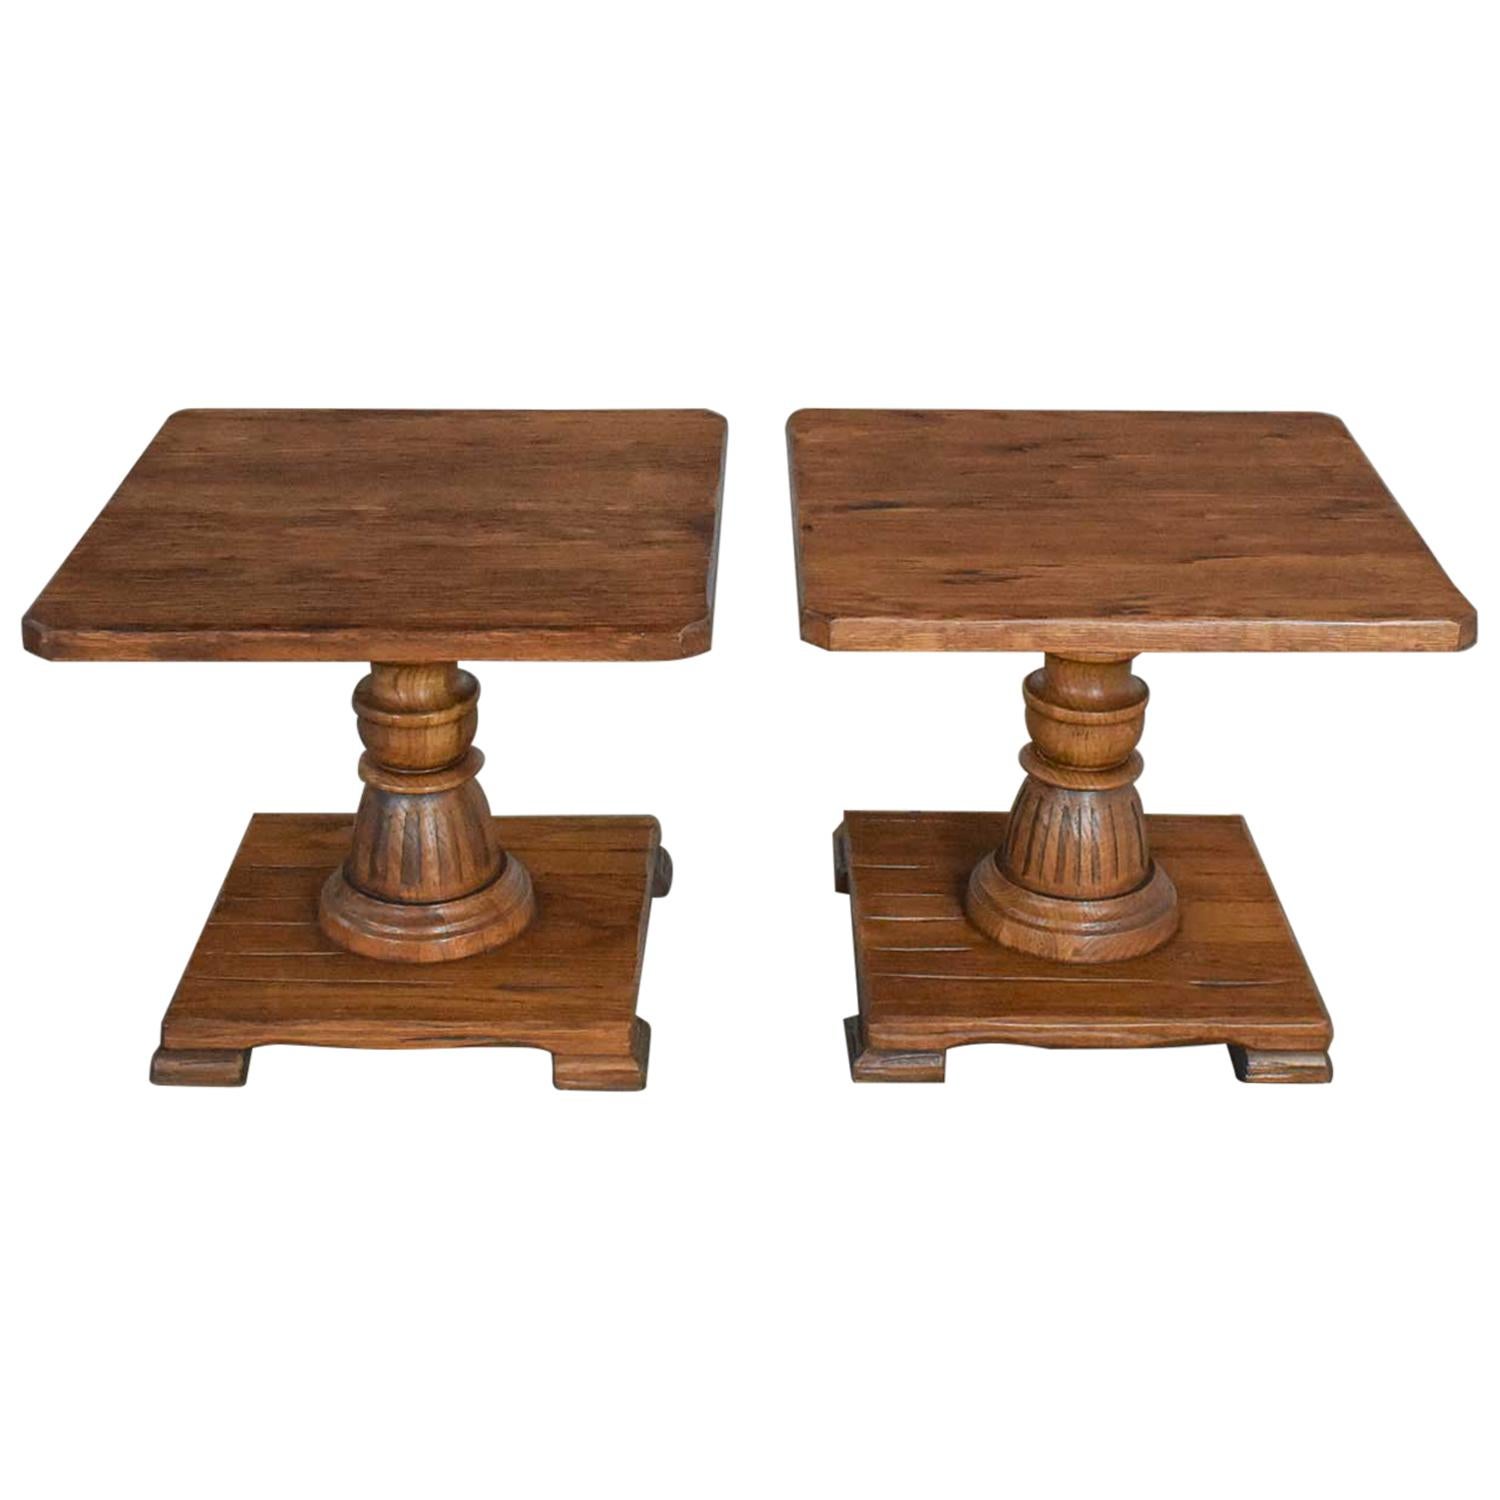 Pair Vintage Ranch Oak Pedestal Side Tables with Acorn Brown Finish by a. Brandt